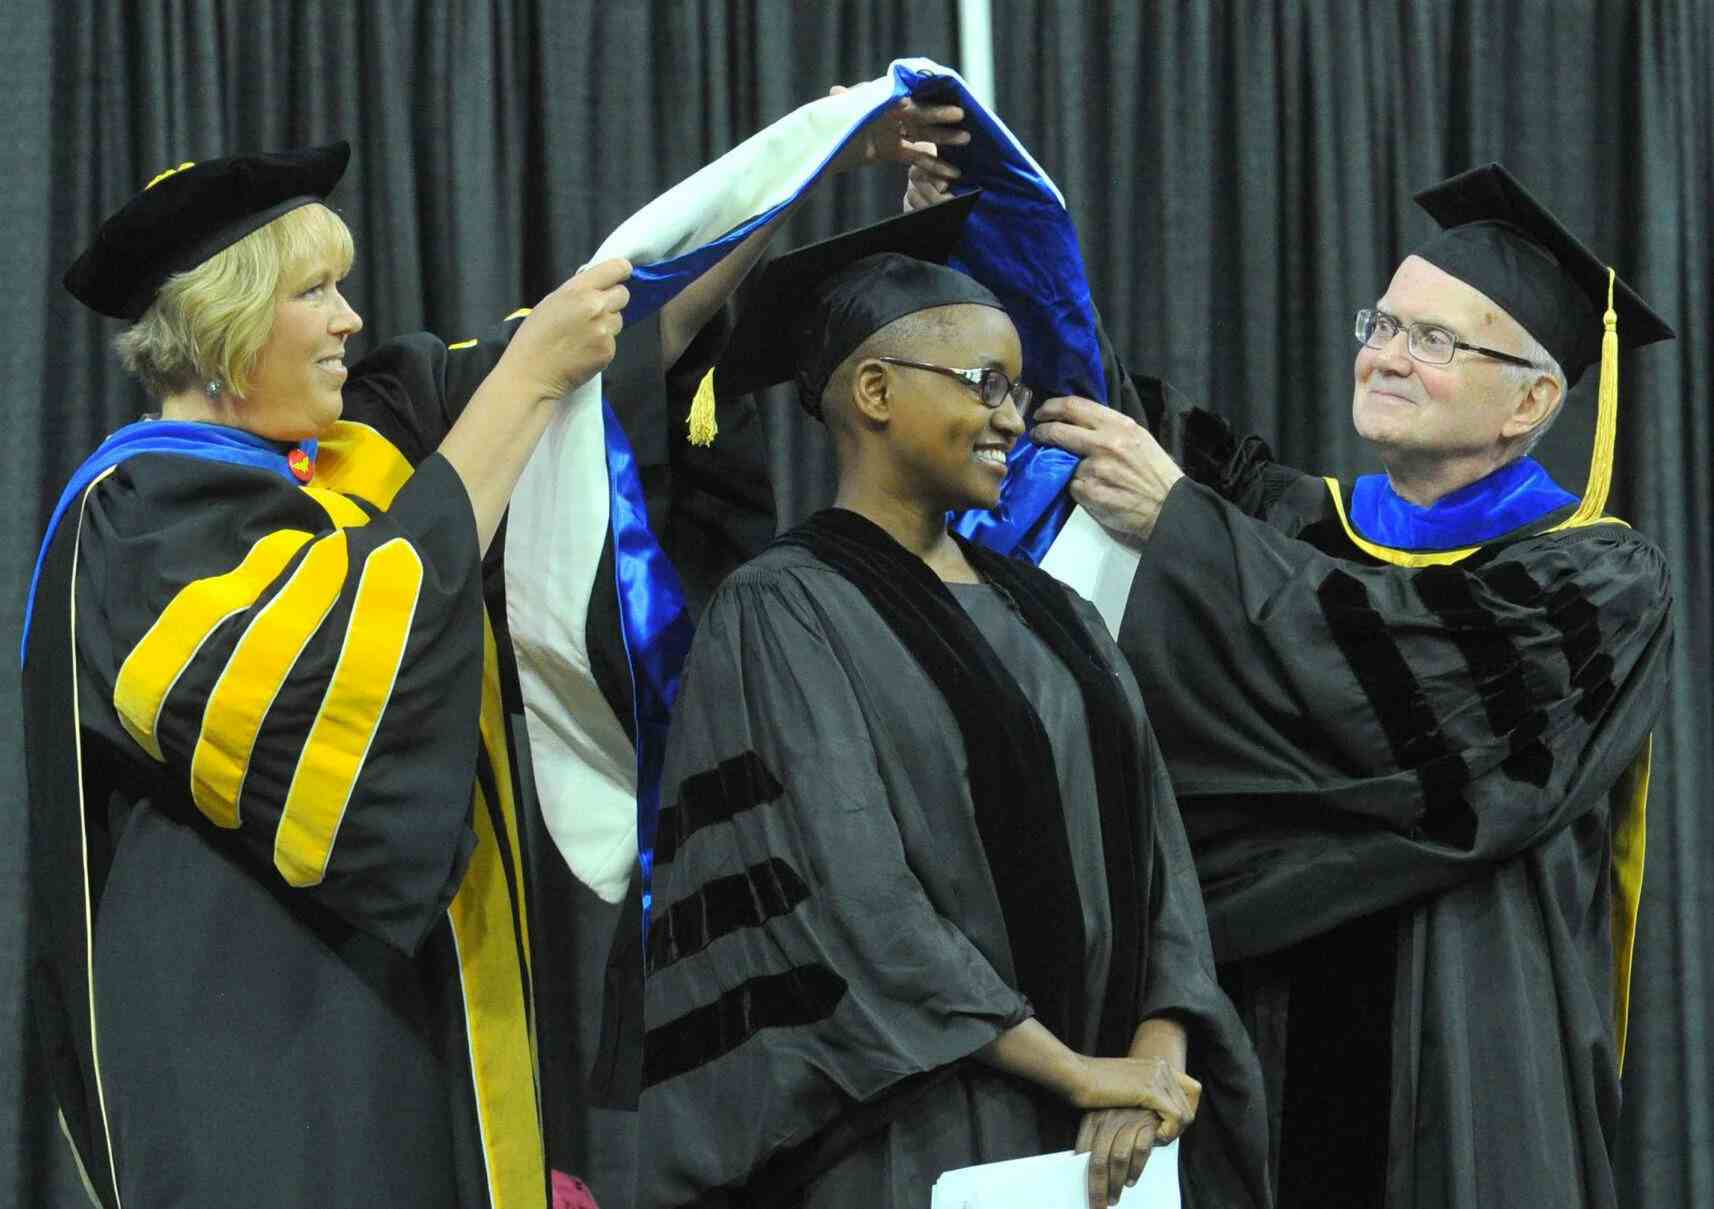 Nelly Cheboi at Augustana commencement moments before getting her honorary doctorate